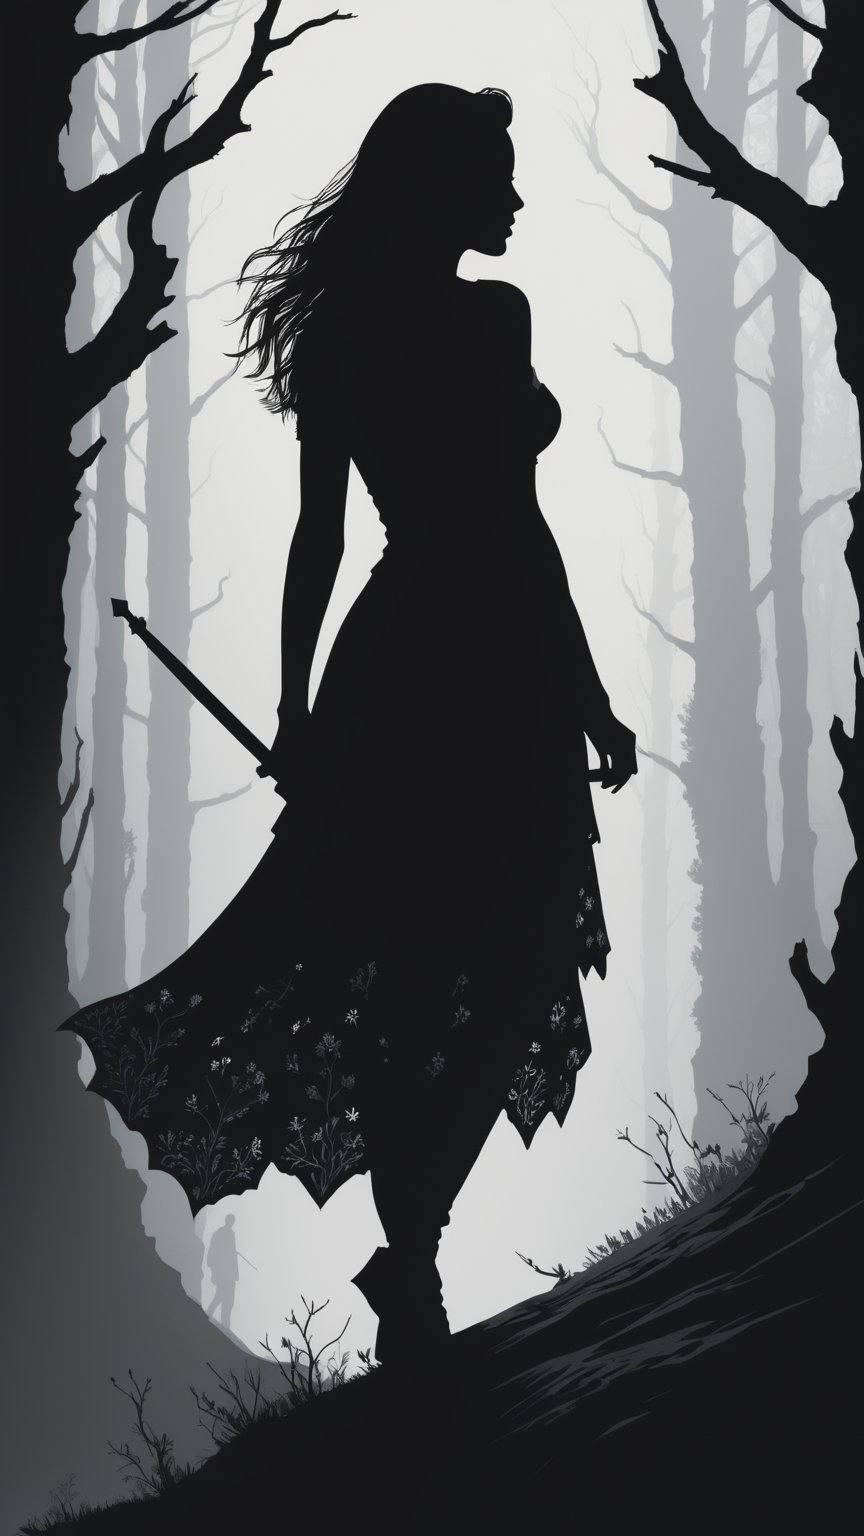 Against a pitch-black AMOLED wallpaper, the woman's silhouetted form emerges in stark contrast. In an illustration style reminiscent of Jakub Rozalski, her figure is rendered in delicate detail, with intricate textures and subtle shading. The minimalist background allows her shape to take center stage, as if she's been cut from a fantasy realm and deposited onto this dark, magical canvas.